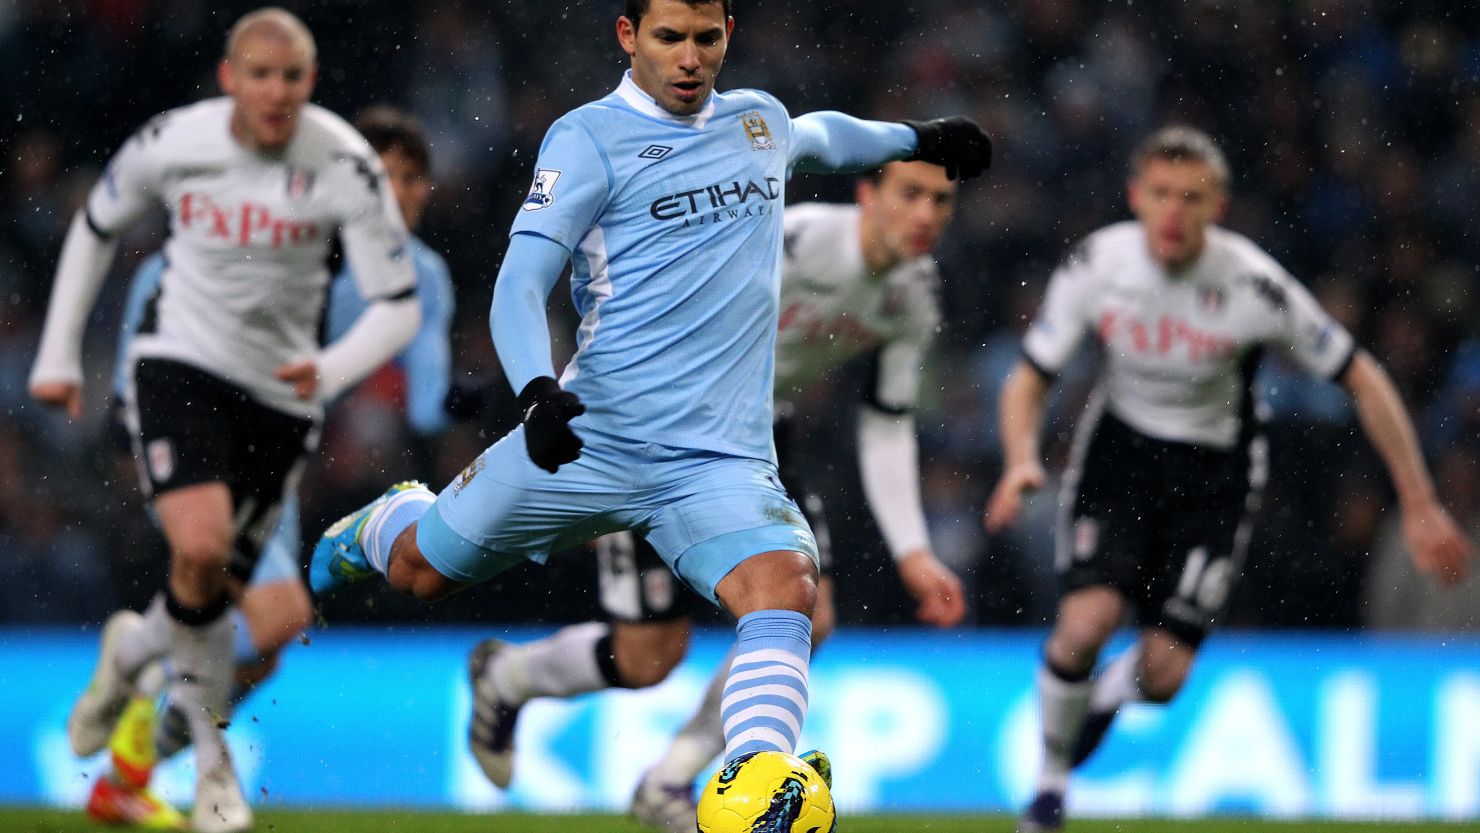 Sergio Aguero fires home from the penalty spot to give Manchester City the lead against Fulham at the Etihad Stadium.